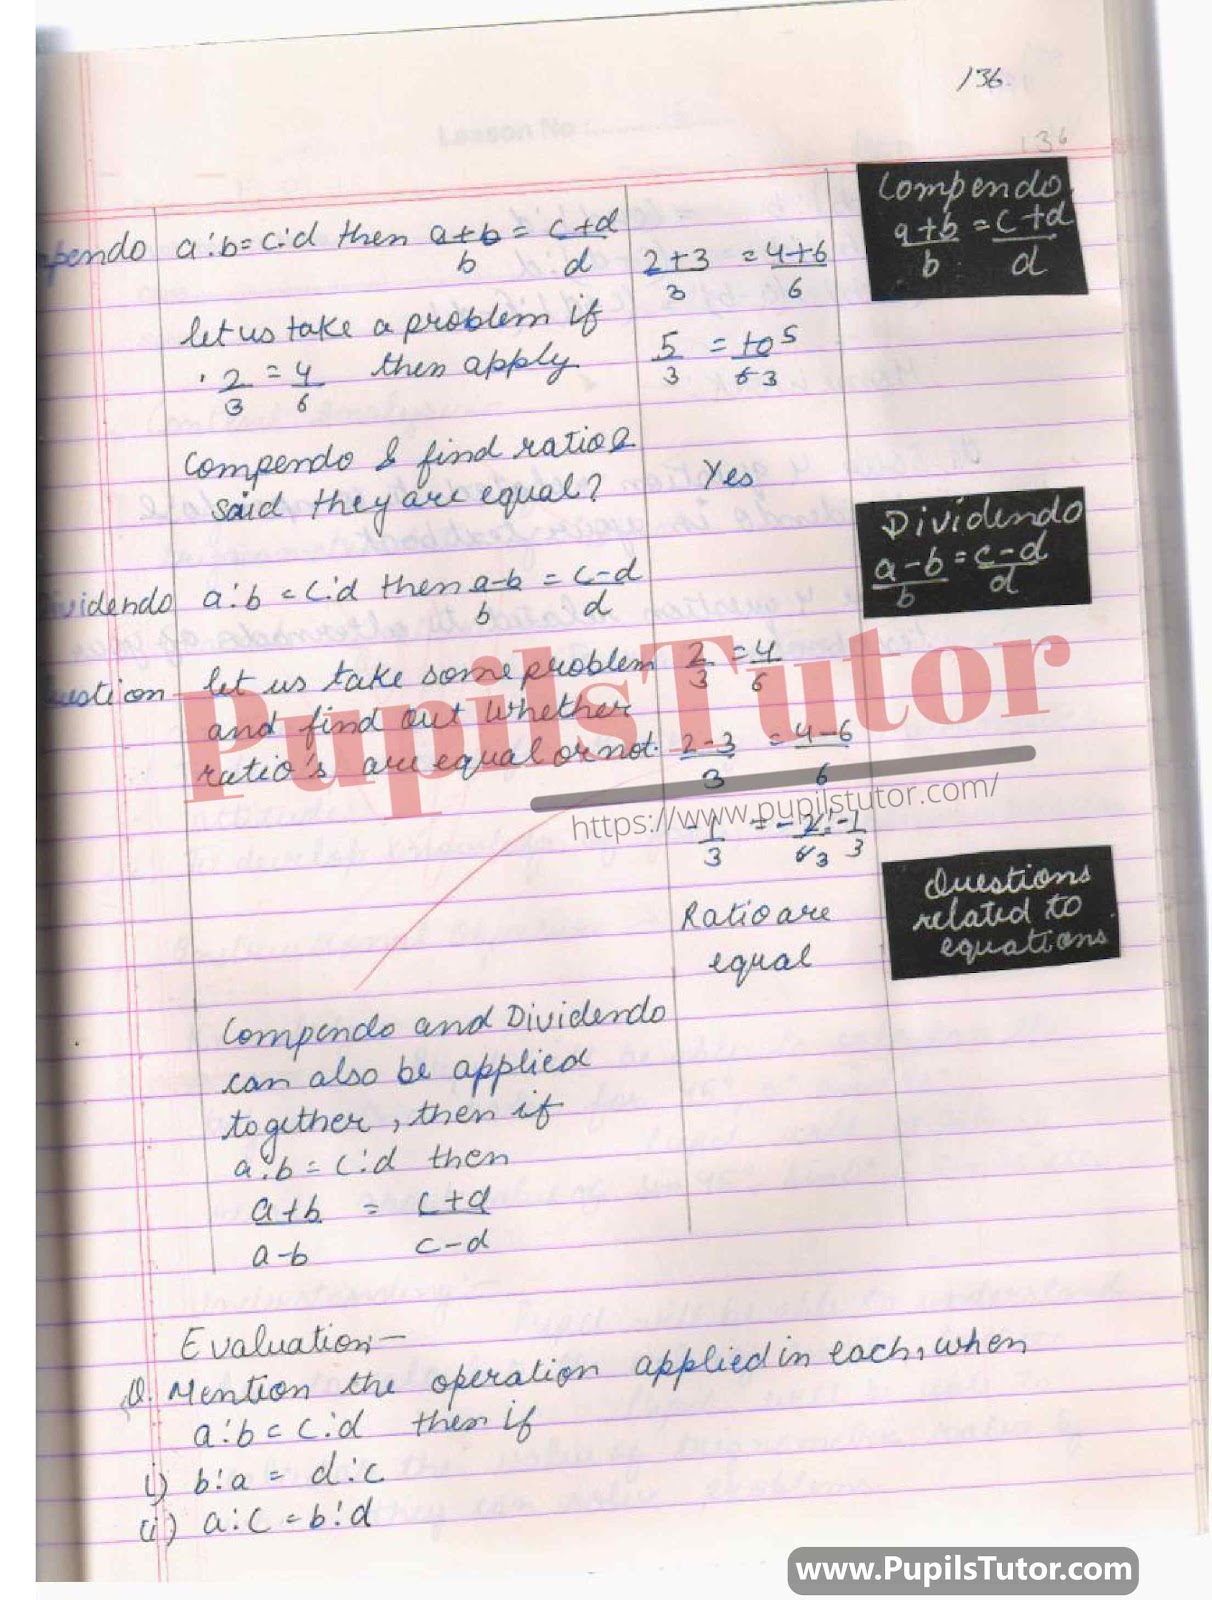 BED, DELED, BELED, BA B.Ed Integrated, B.Com B.Ed, BSC BEd, BTC, BSTC, M.ED, DED And NIOS Teaching Of Mathematics Class 4th 5th 6th 7th 8th 9th, 10th, 11th, 12th Digital Lesson Plan Format On Properties Of Proportion Topic – [Page And Pic Number 5] – https://www.pupilstutor.com/